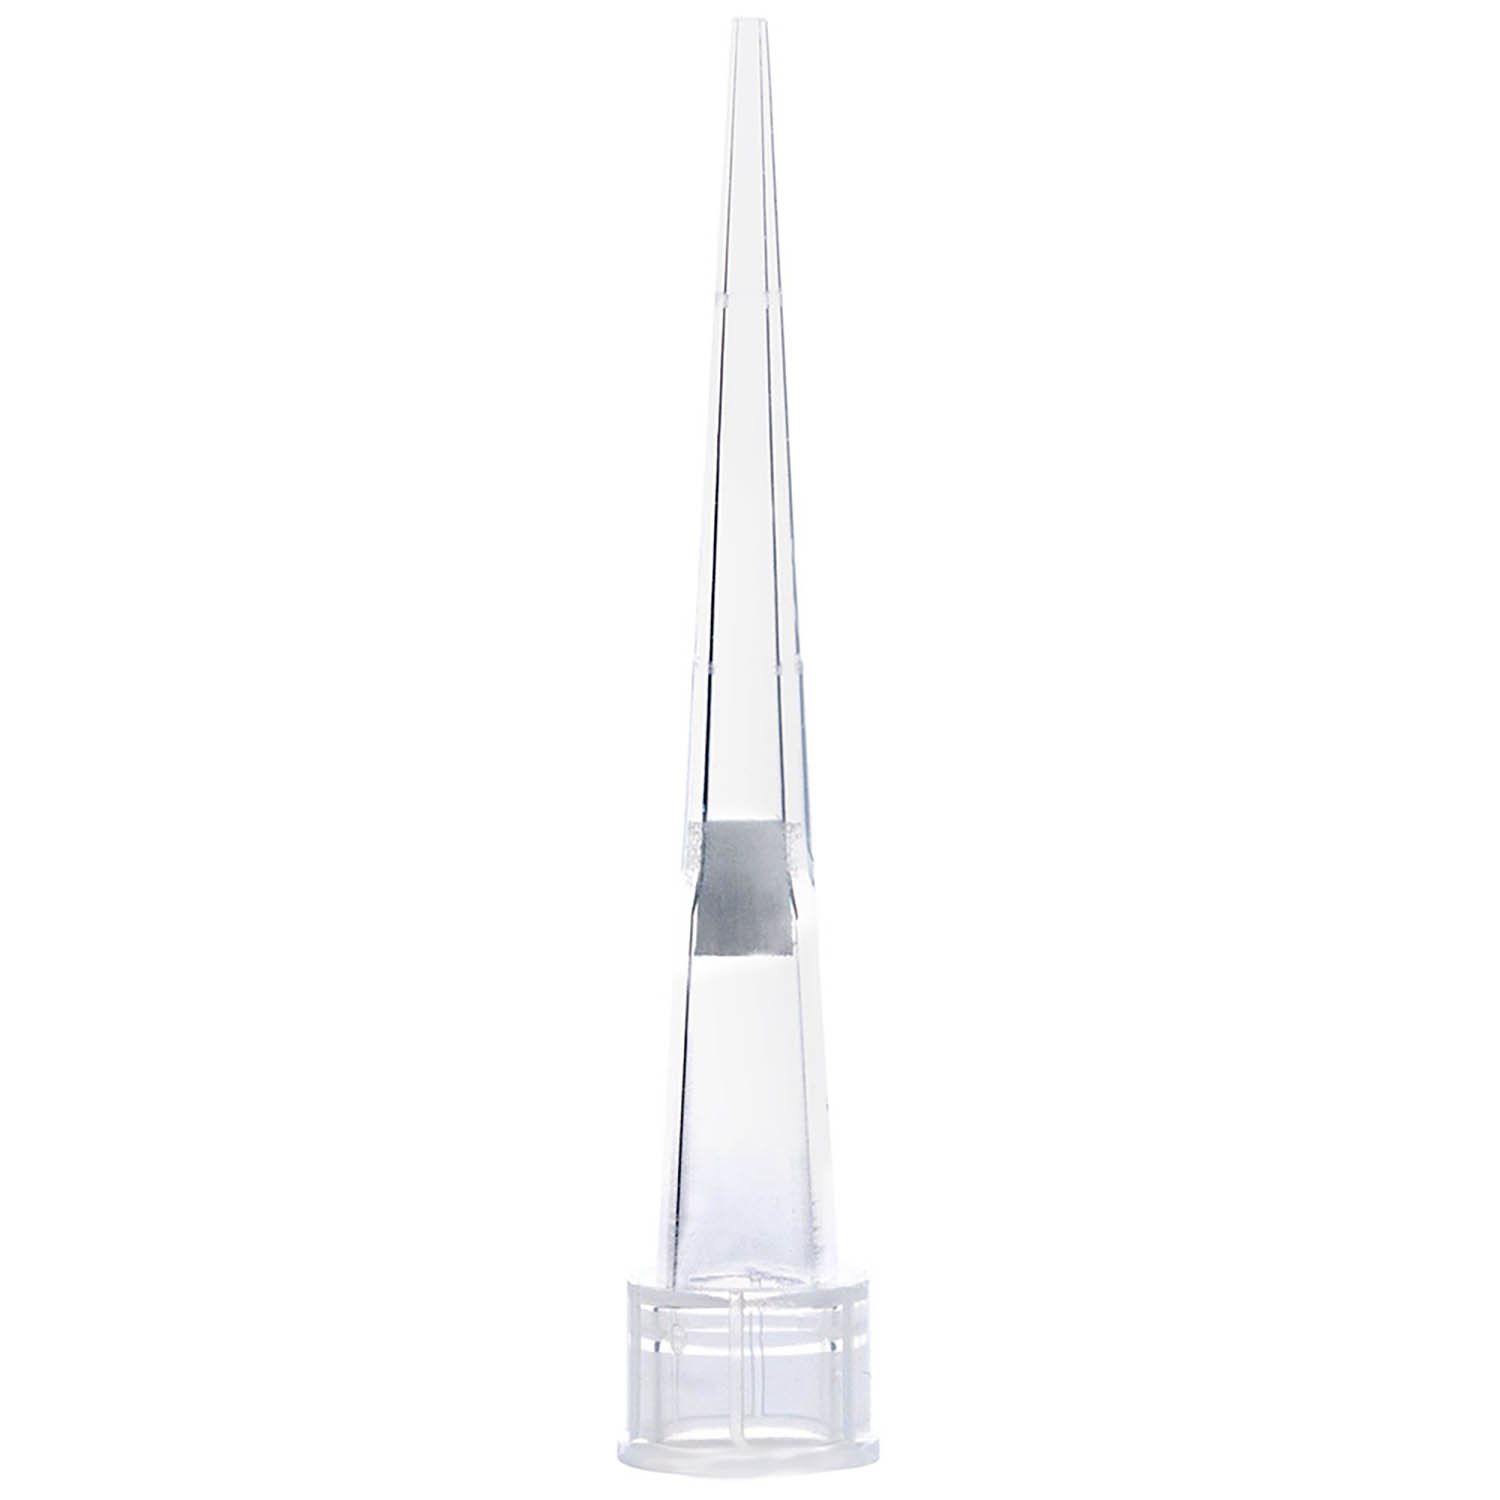 0.1uL-10uL Certified Universal Low Retention Graduated Filter Pipette Tip - Natural, Sterile, 31mm, Case of 1920